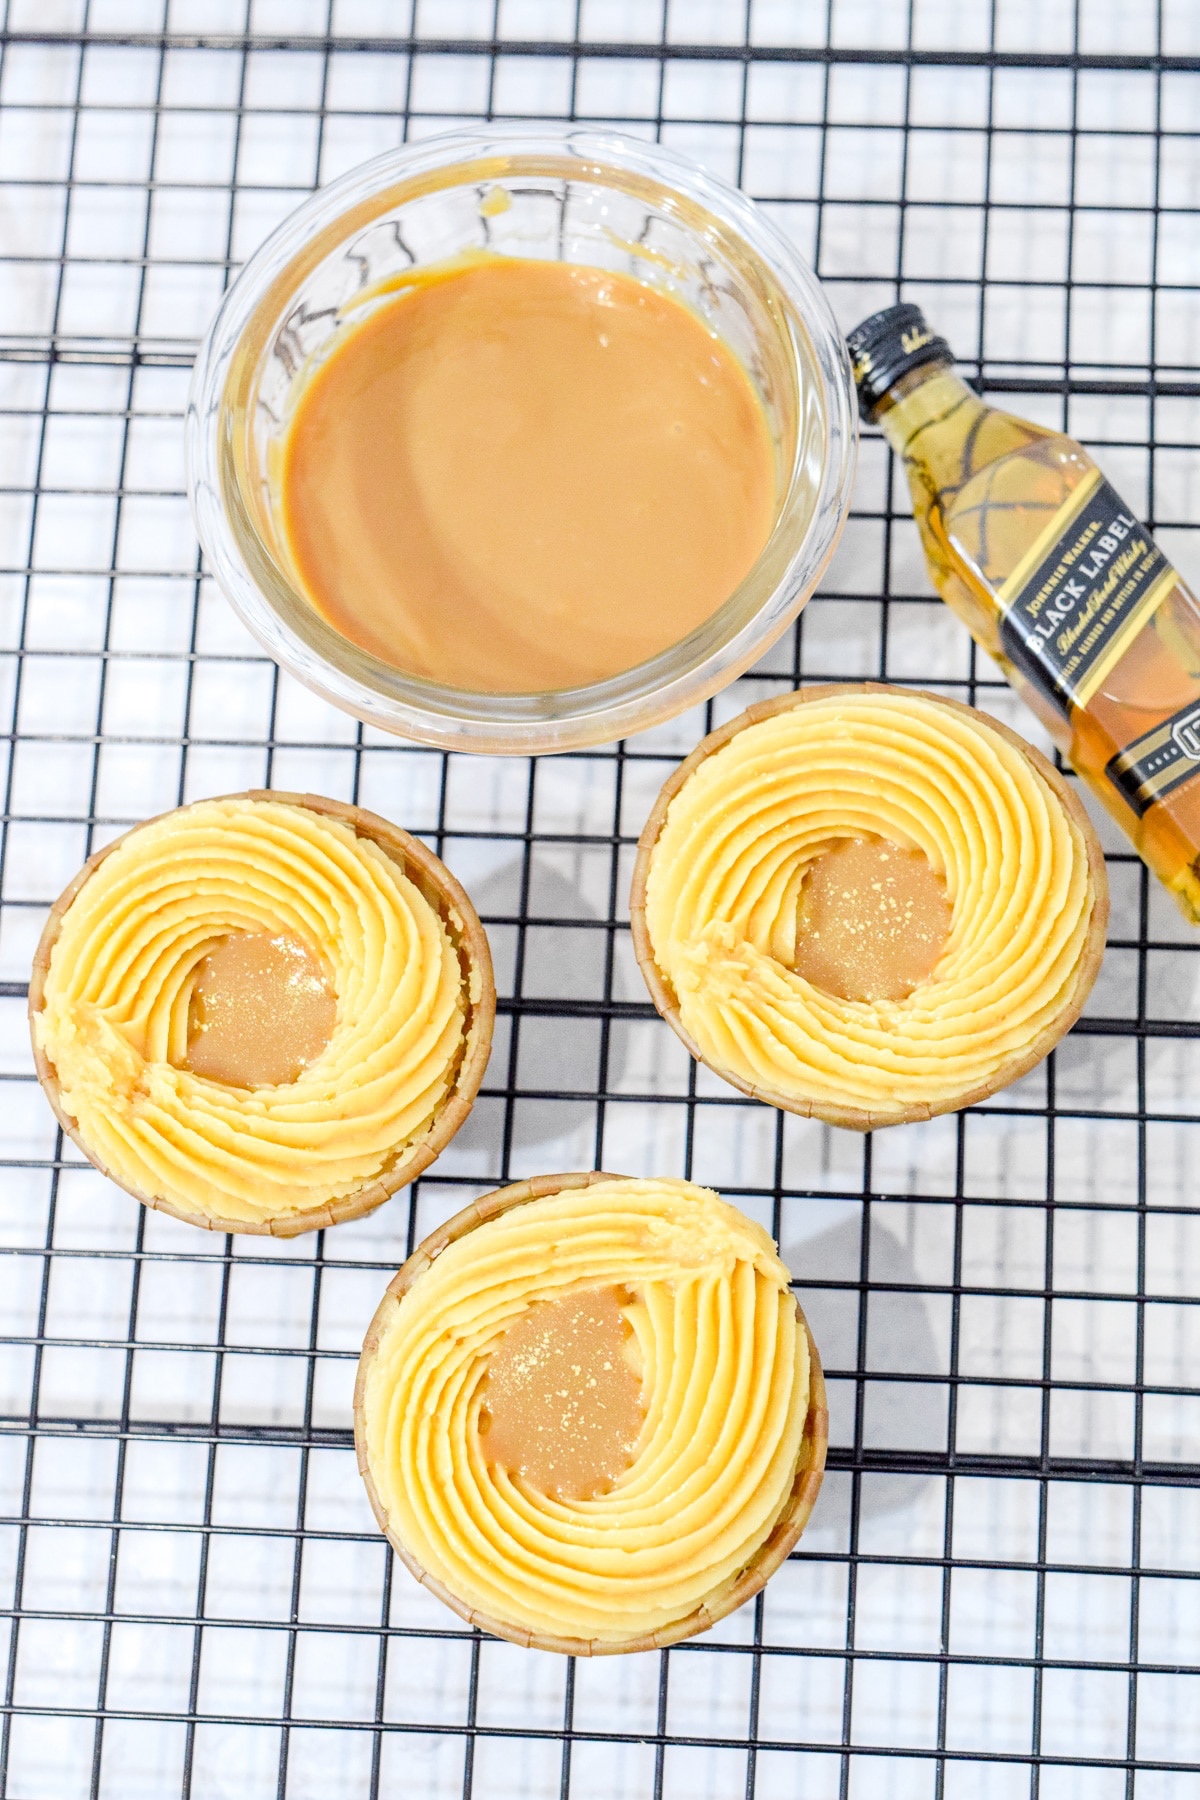 Cupcakes made with salted caramel and whiskey.